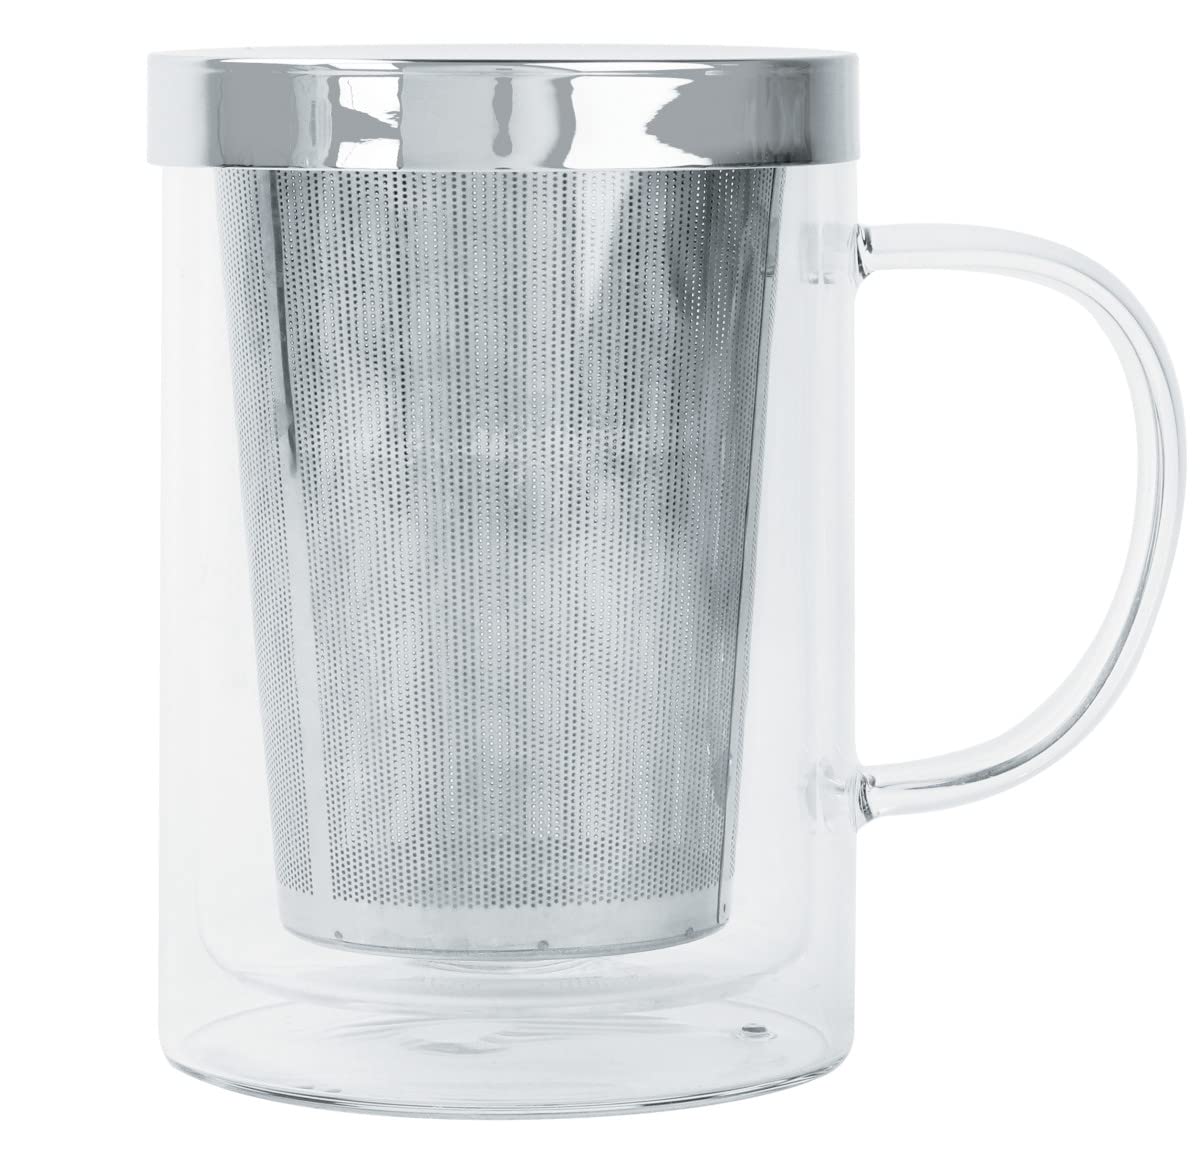 CRISTEL - VERBENA DOUBLE-WALL GLASS TEACUP WITH INFUSER 0,4 L